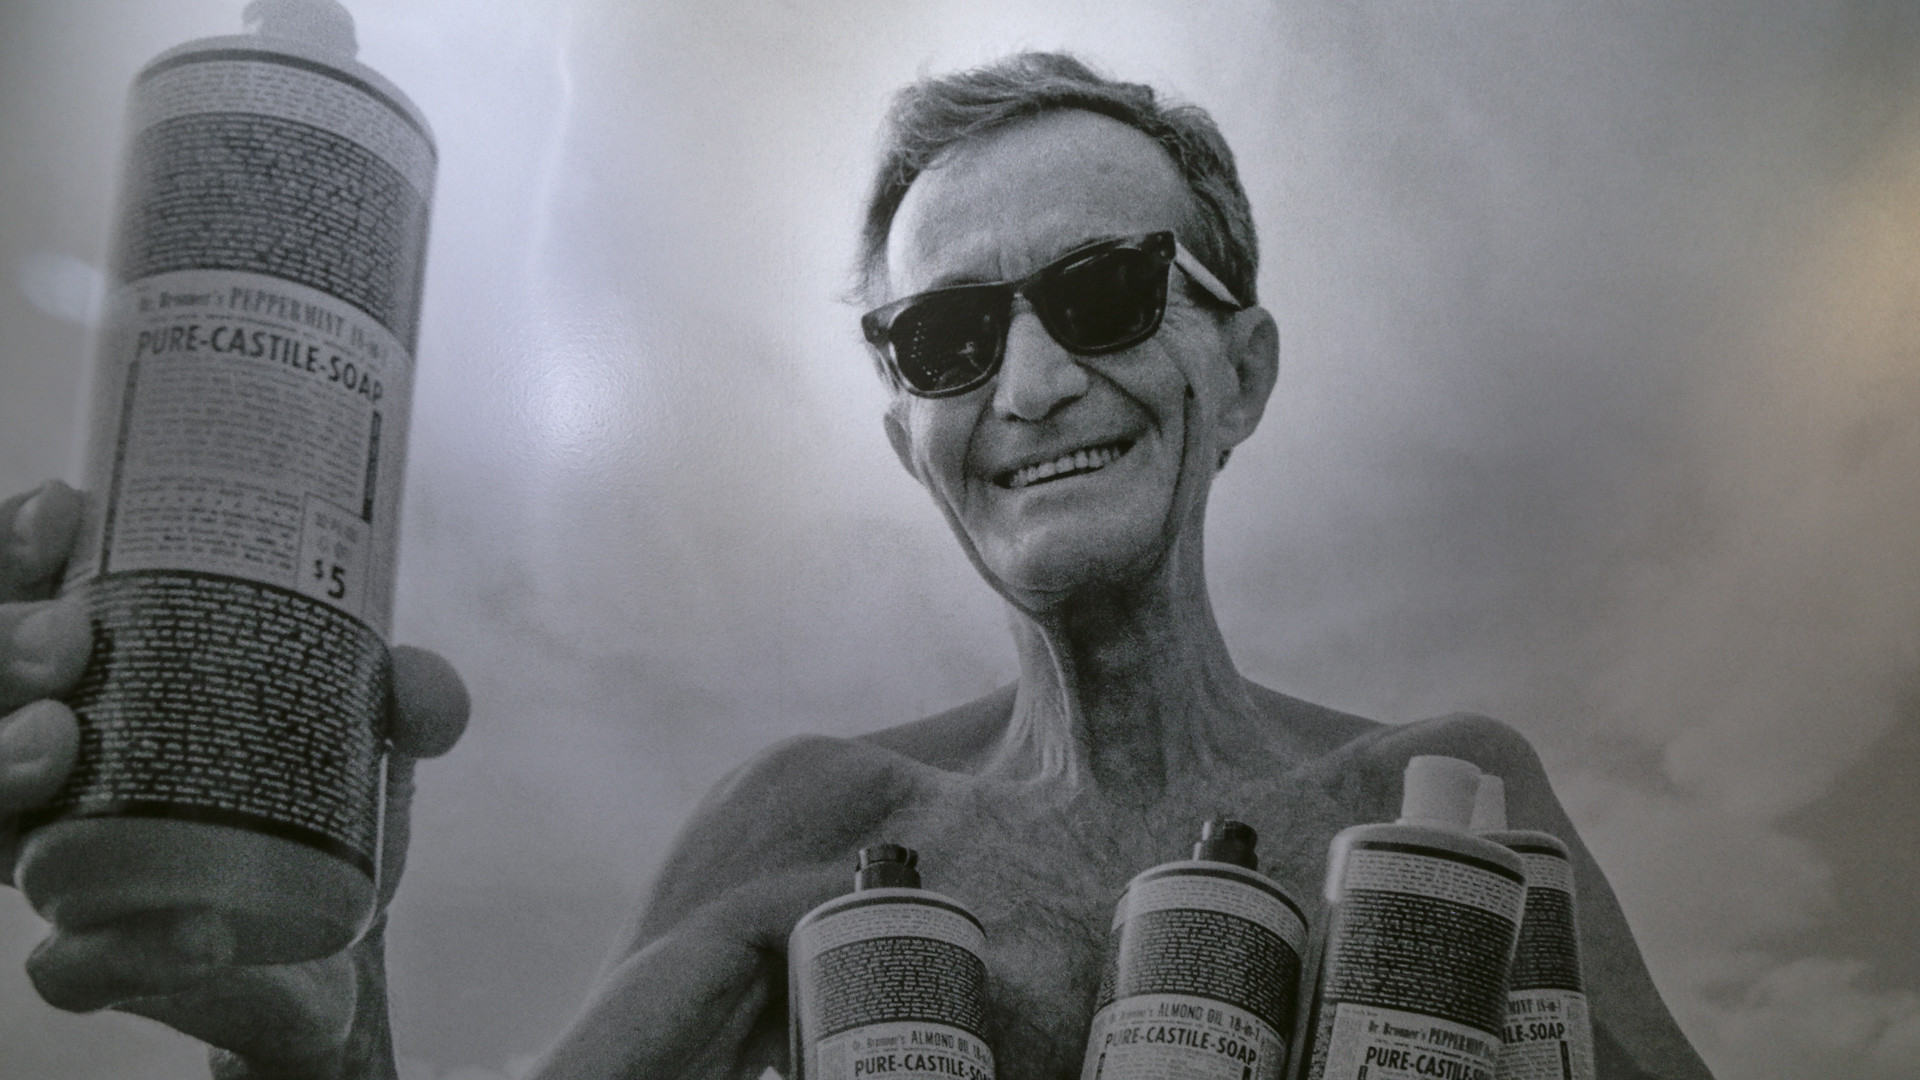 Dr. Bronner speaks! North County's late, eccentric soap maker returns on new LP